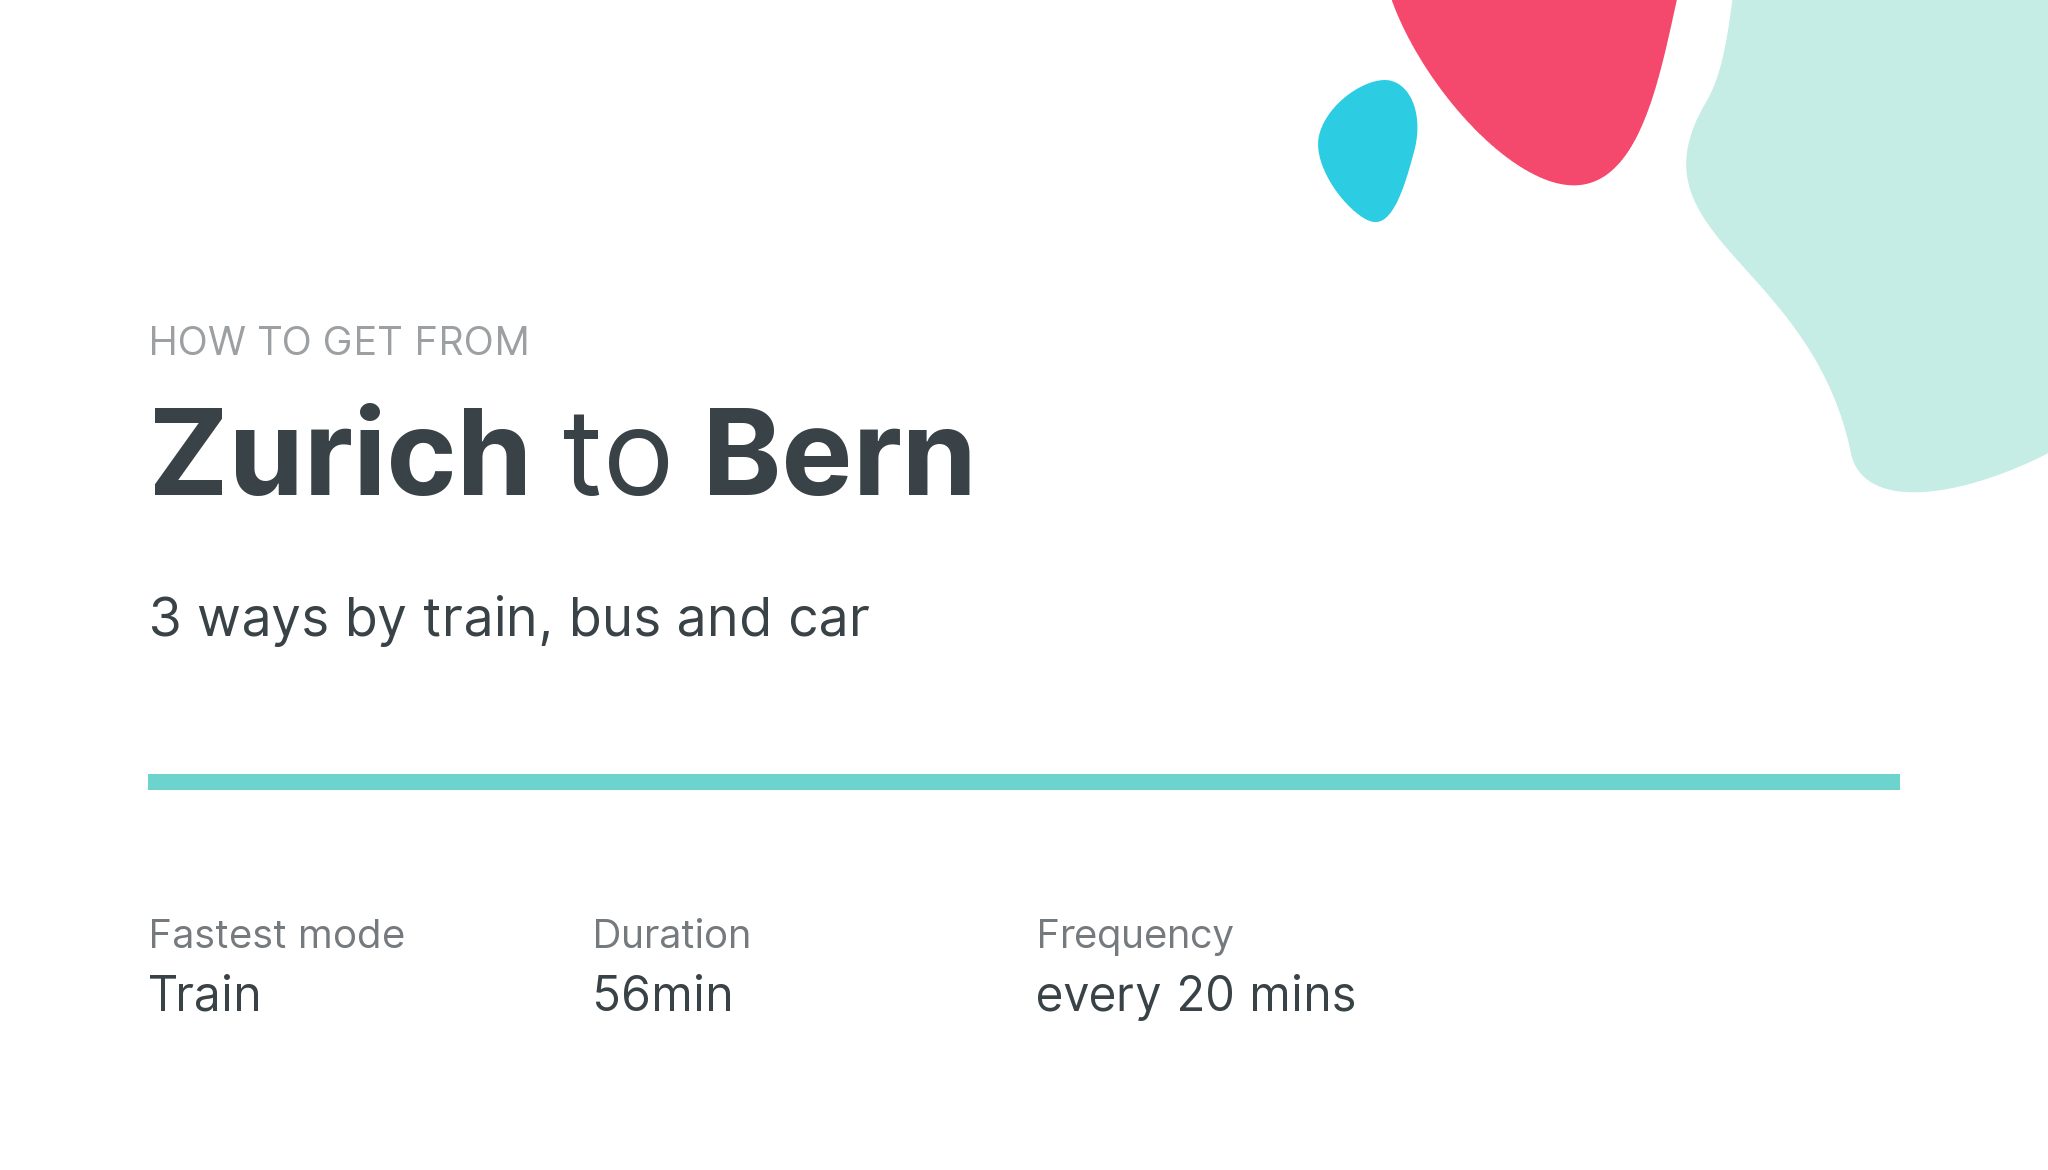 How do I get from Zurich to Bern